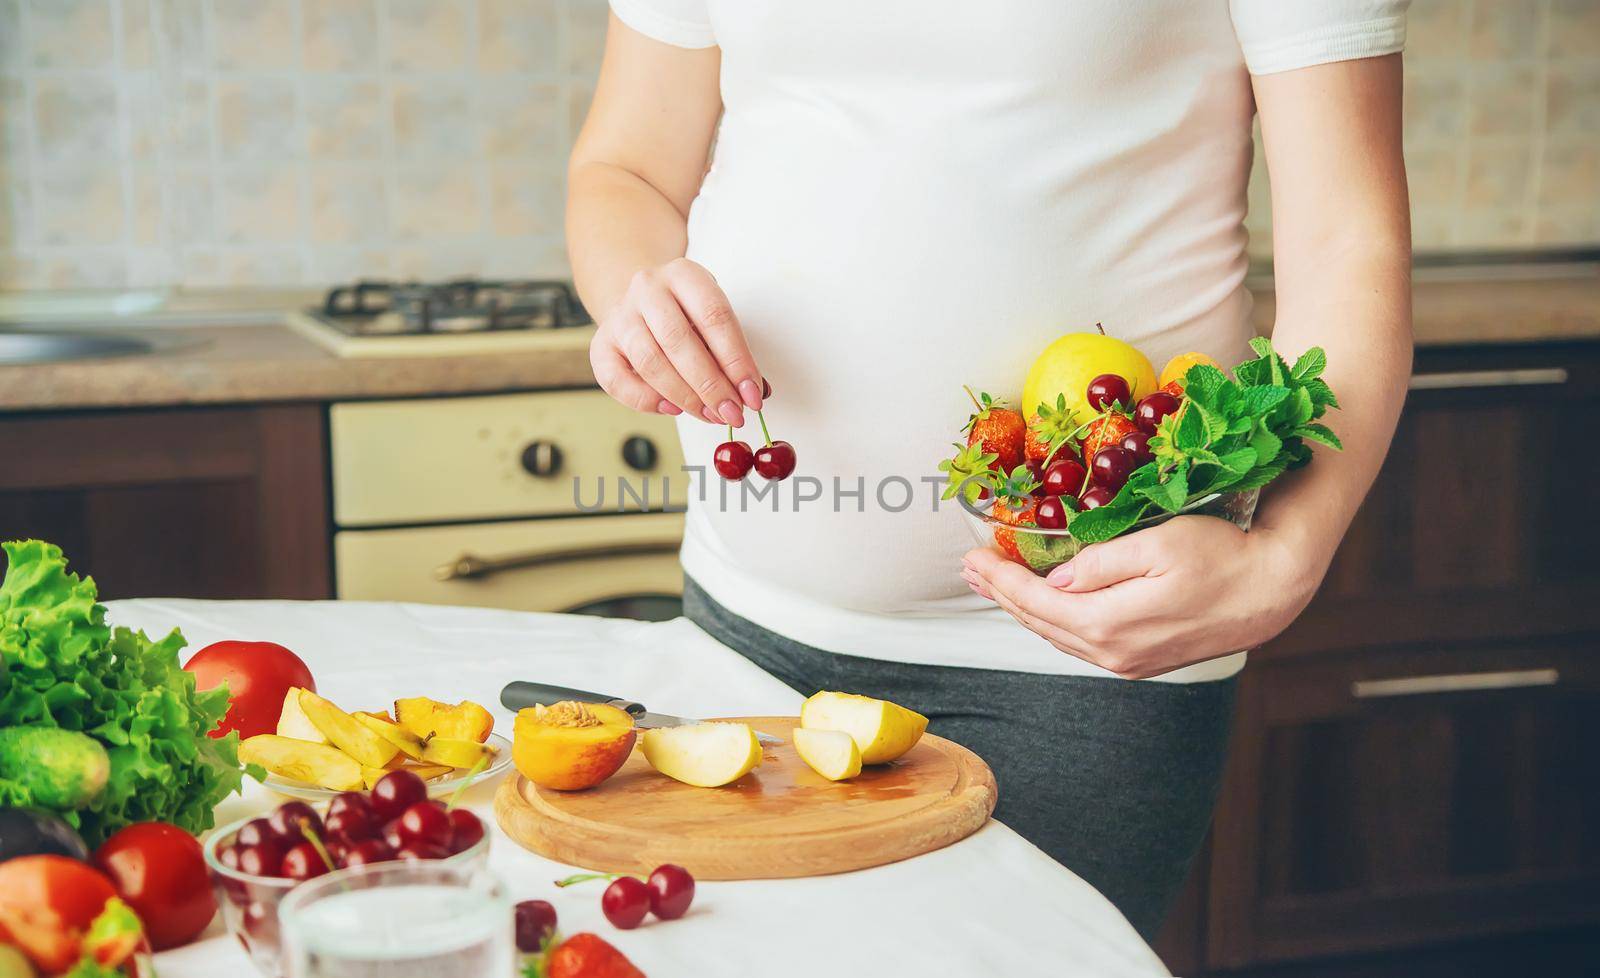 A pregnant woman eats vegetables and fruits. Selective focus. Food.